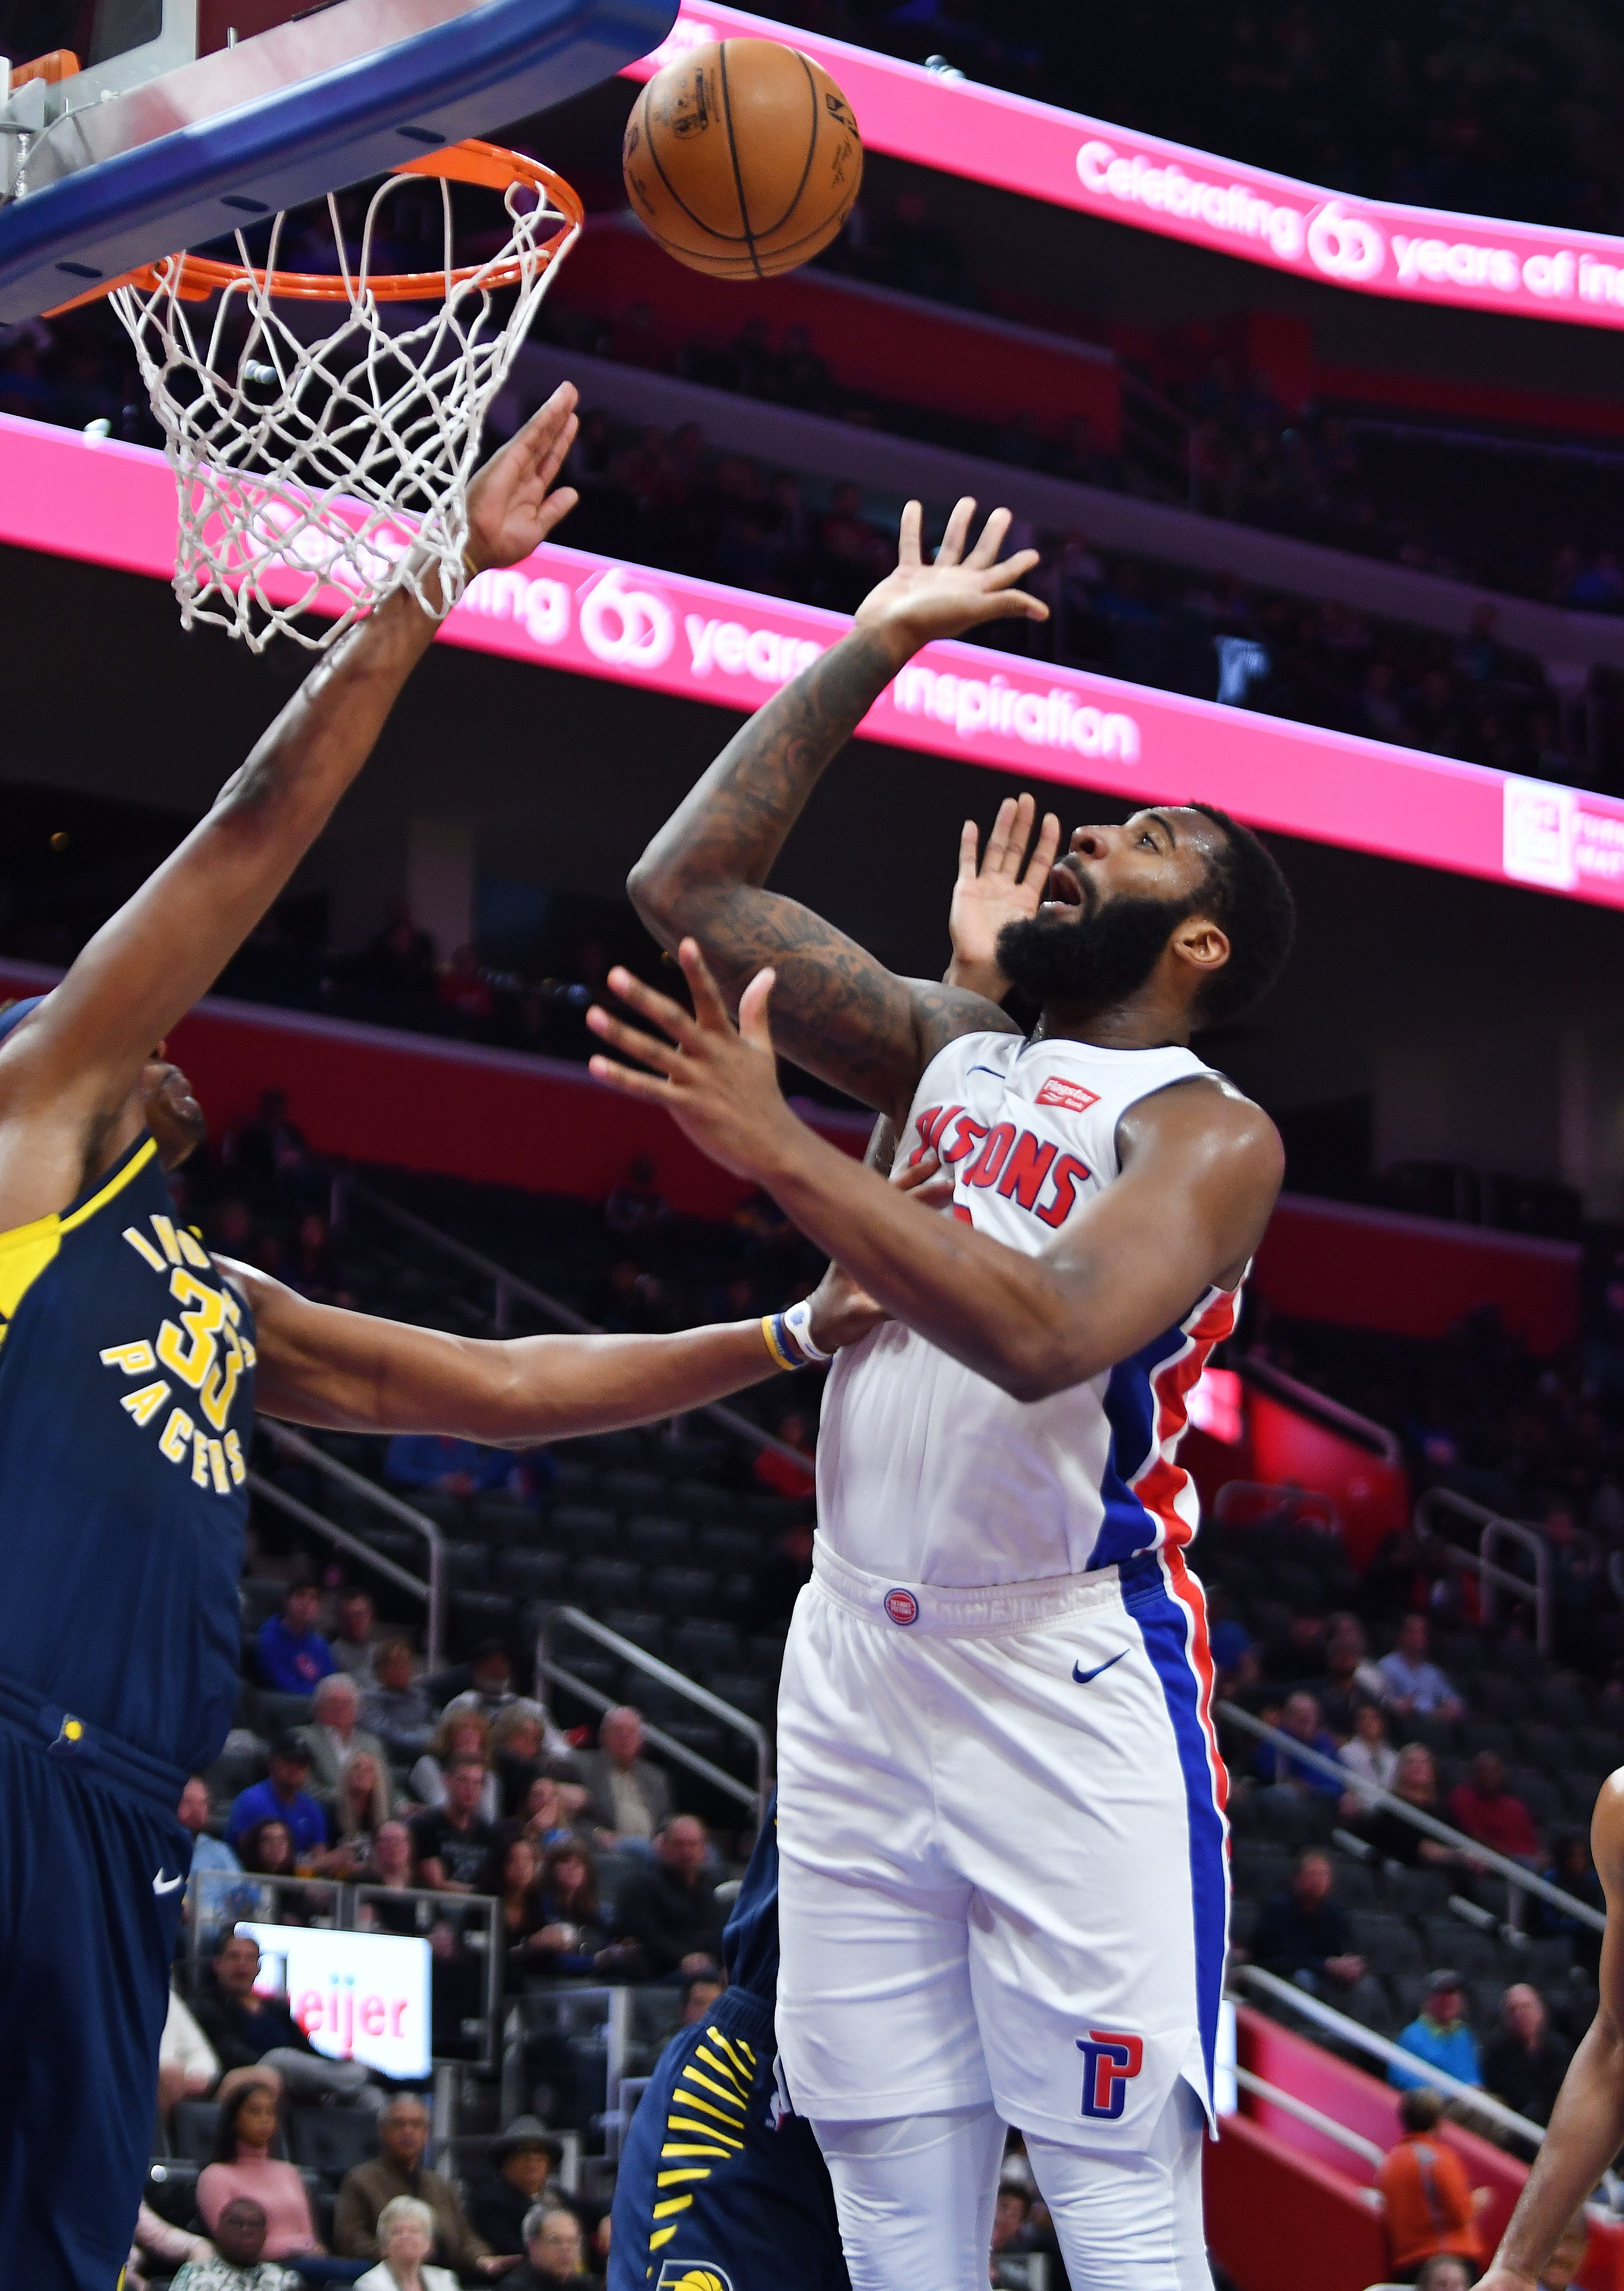 Pistons' Andre Drummond scores over Pacers' Myles Turner in the second quarter.